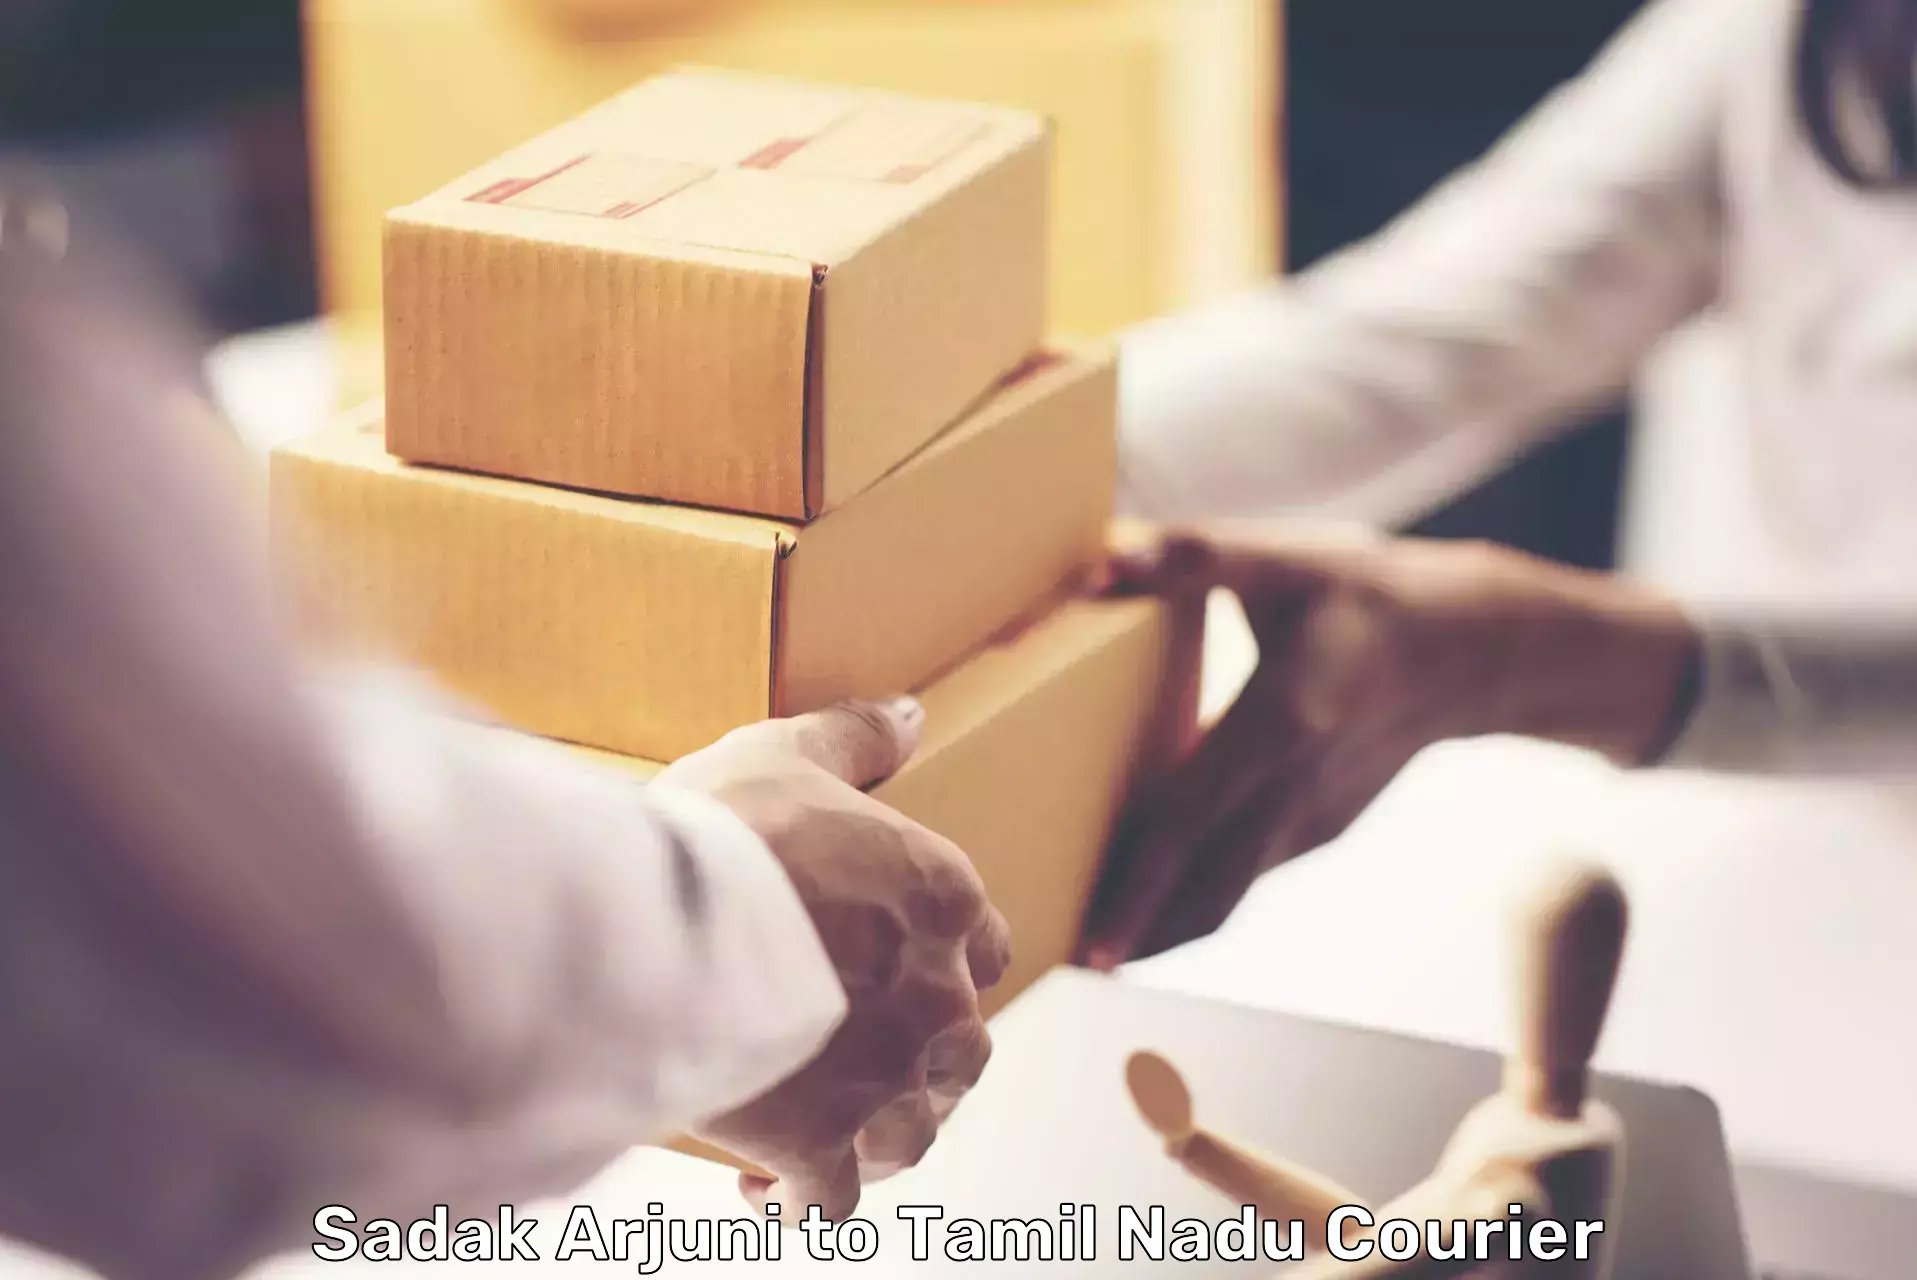 International courier networks Sadak Arjuni to Saveetha Institute of Medical and Technical Sciences Chennai